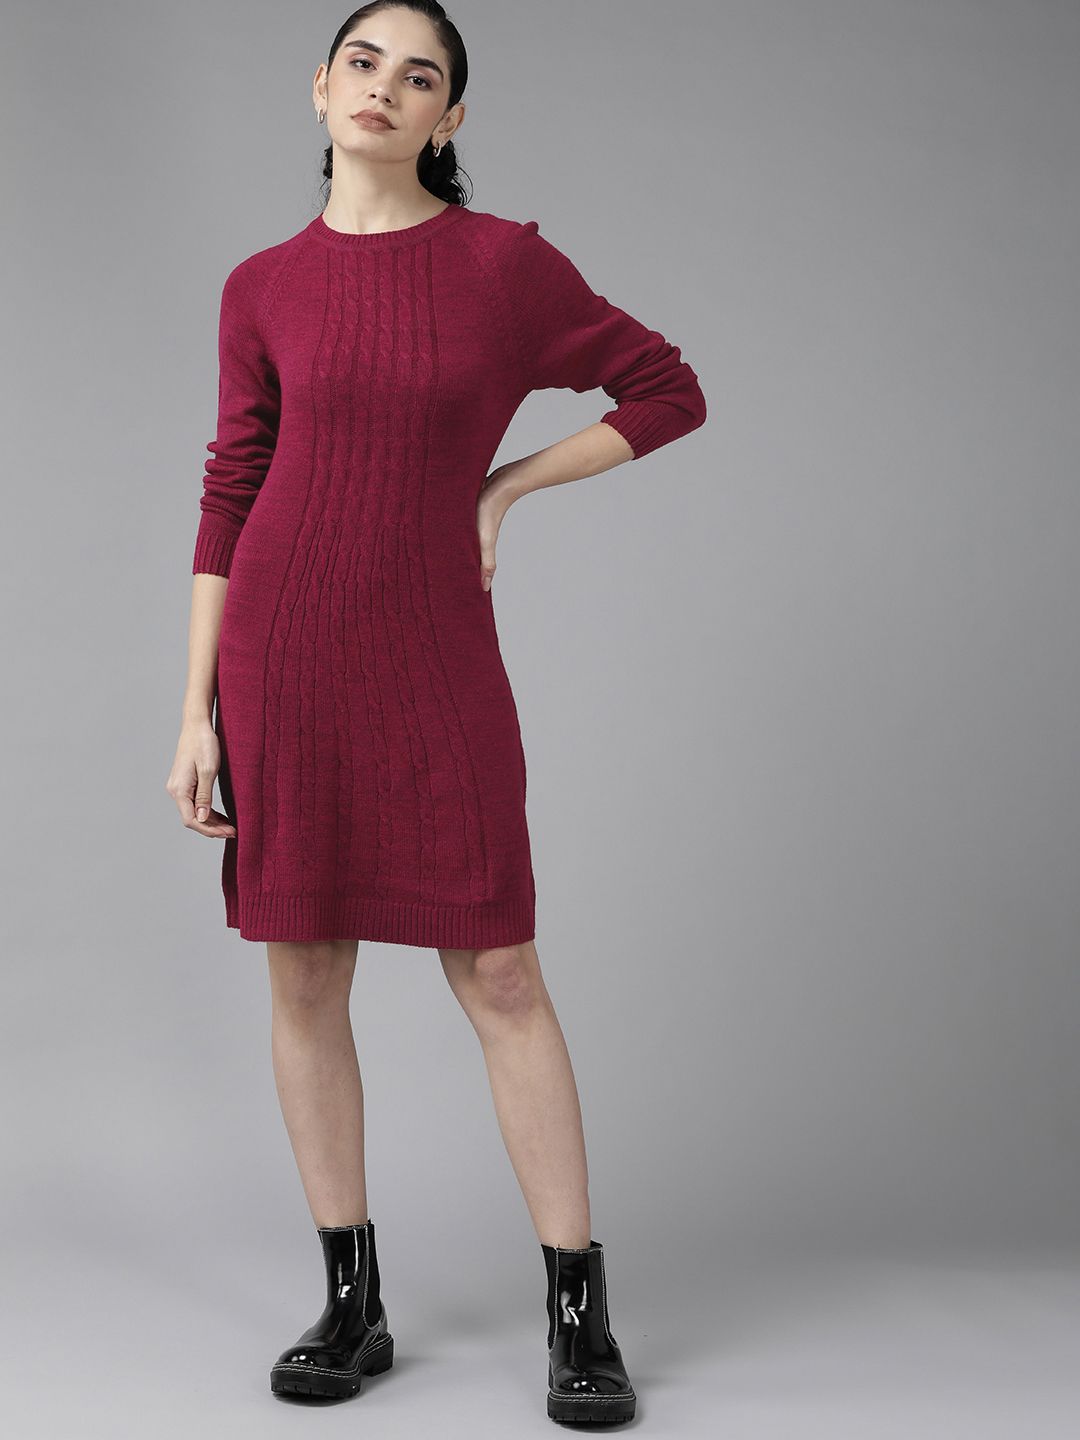 Roadster Women Maroon Cable Knit Sweater Dress Price in India